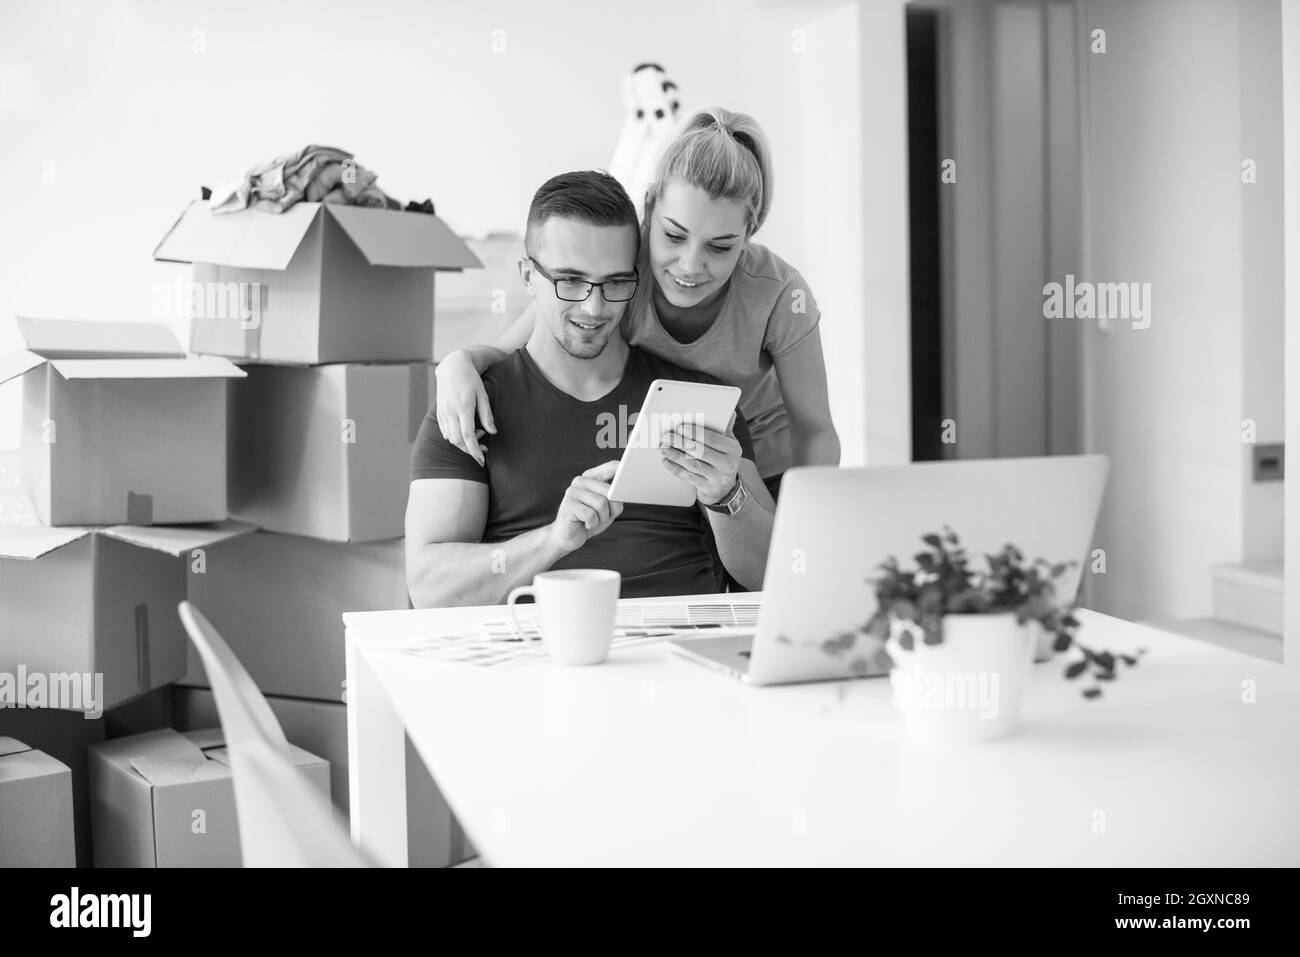 Young couple moving in a new home. Man and woman at the table using notebook laptop computer and plans with boxes around them Stock Photo